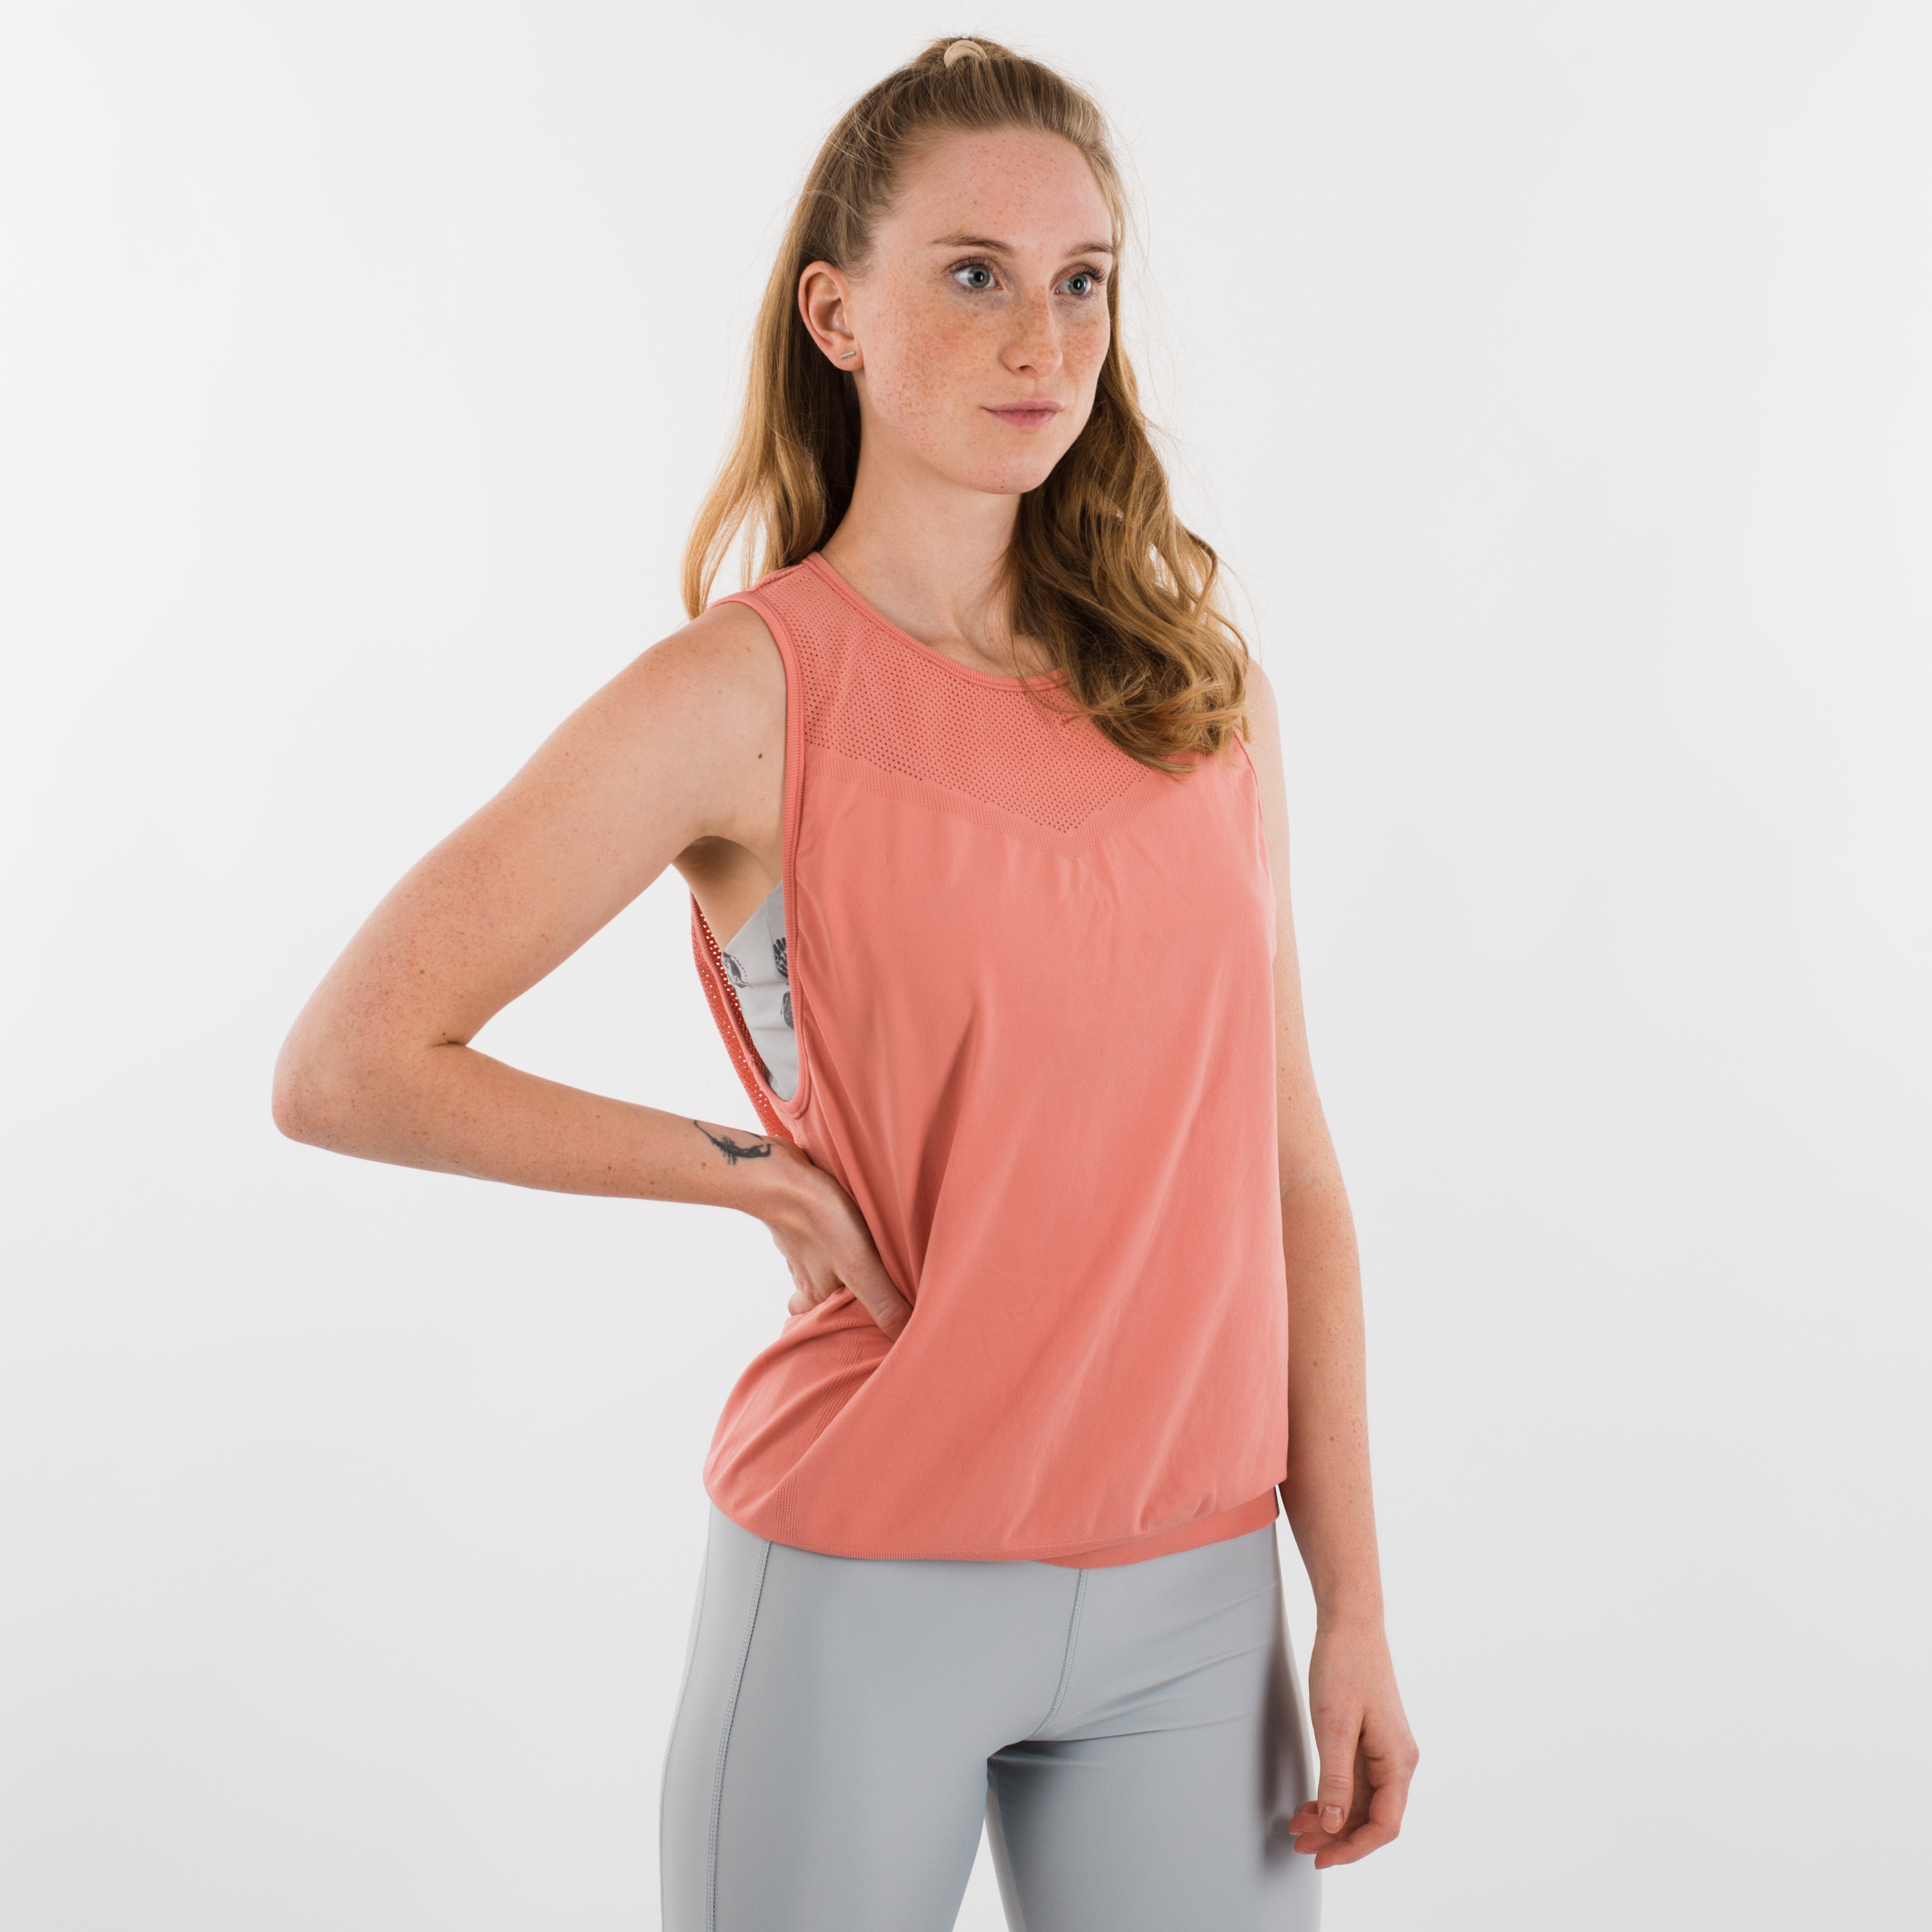 Carefree Seamless Reversible Tank in Light Mocha (Online Exclusive